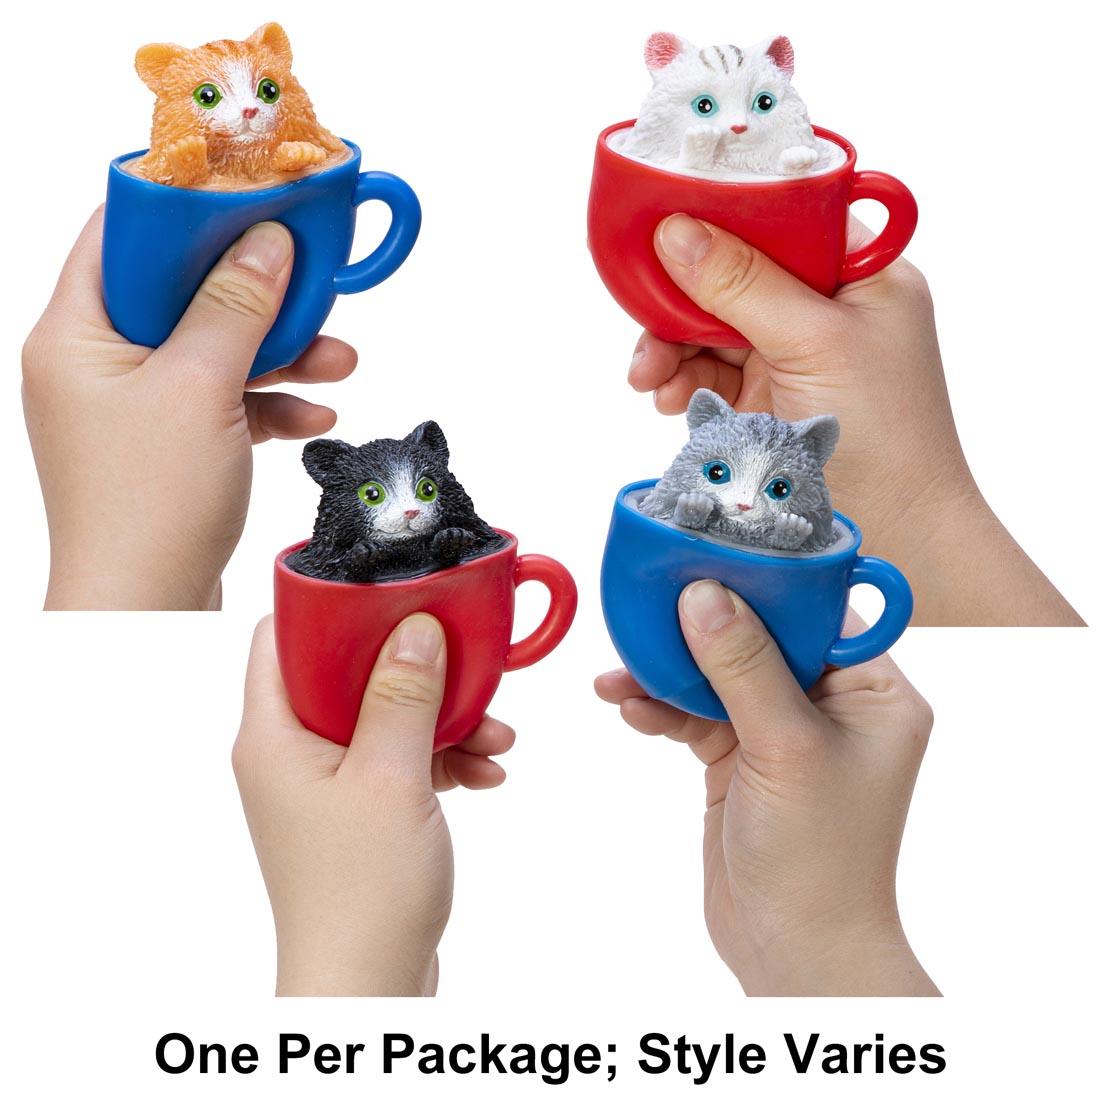 hands holding 4 different Pop-A-Chino Kitties Squishy Toy By Schylling Toys with text One Per Package; Style Varies